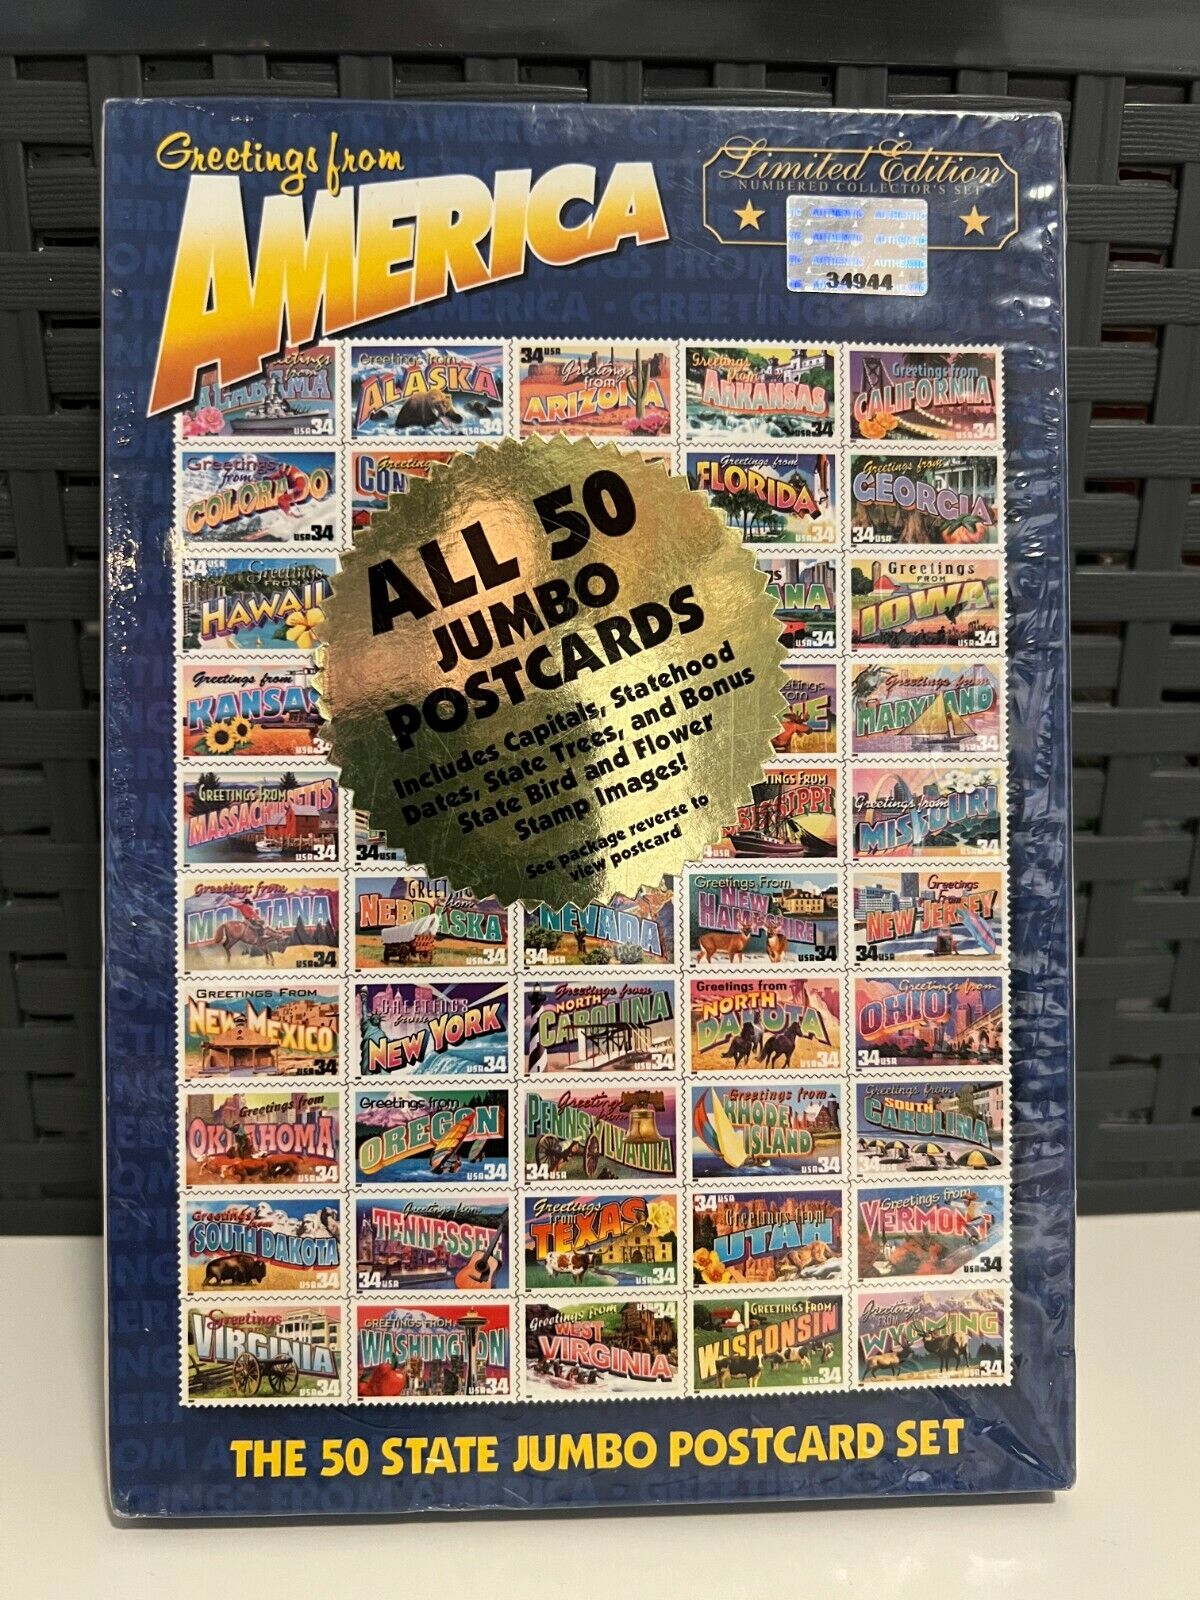 2002 USPS Greetings from America 50 State Jumbo postcard set Limited Edition